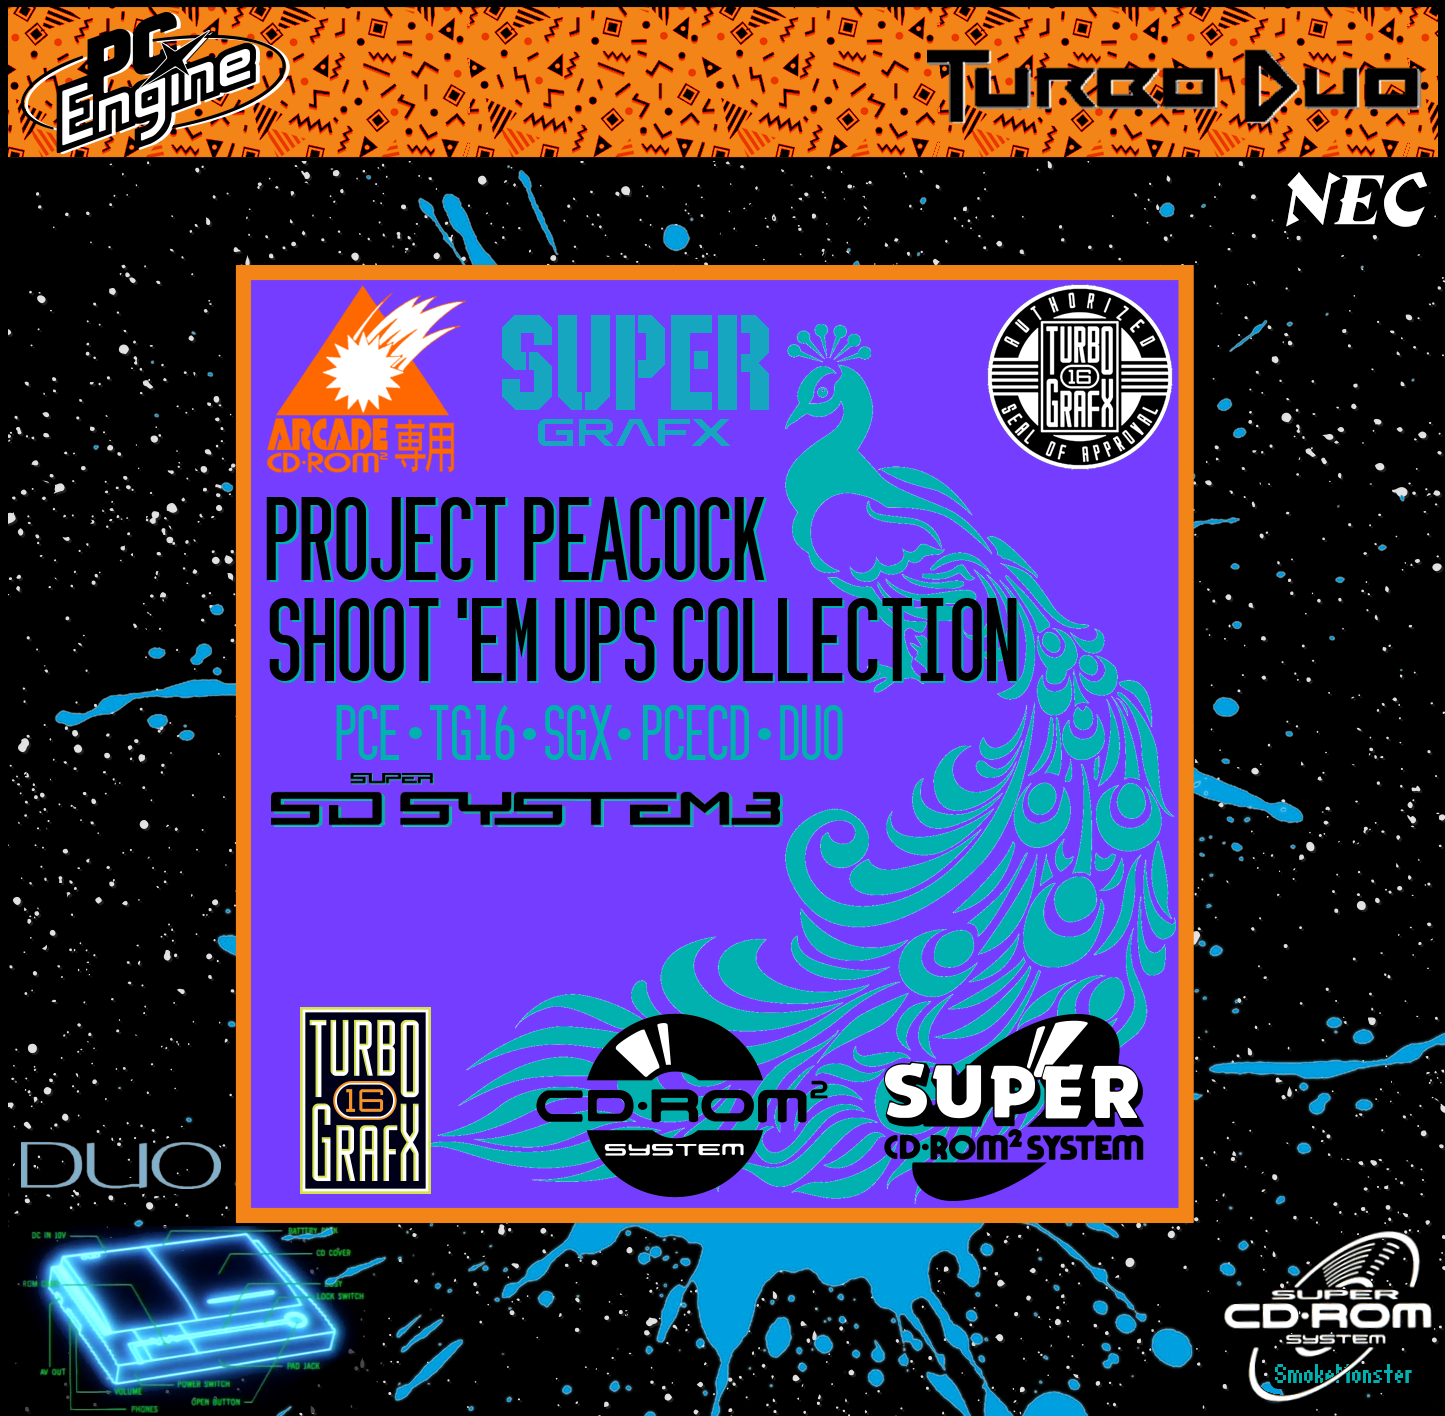 Project Peacock 2.0: Every Shoot ’em Up for the PC Engine Platform (CD, PCE/TG16, SGX)